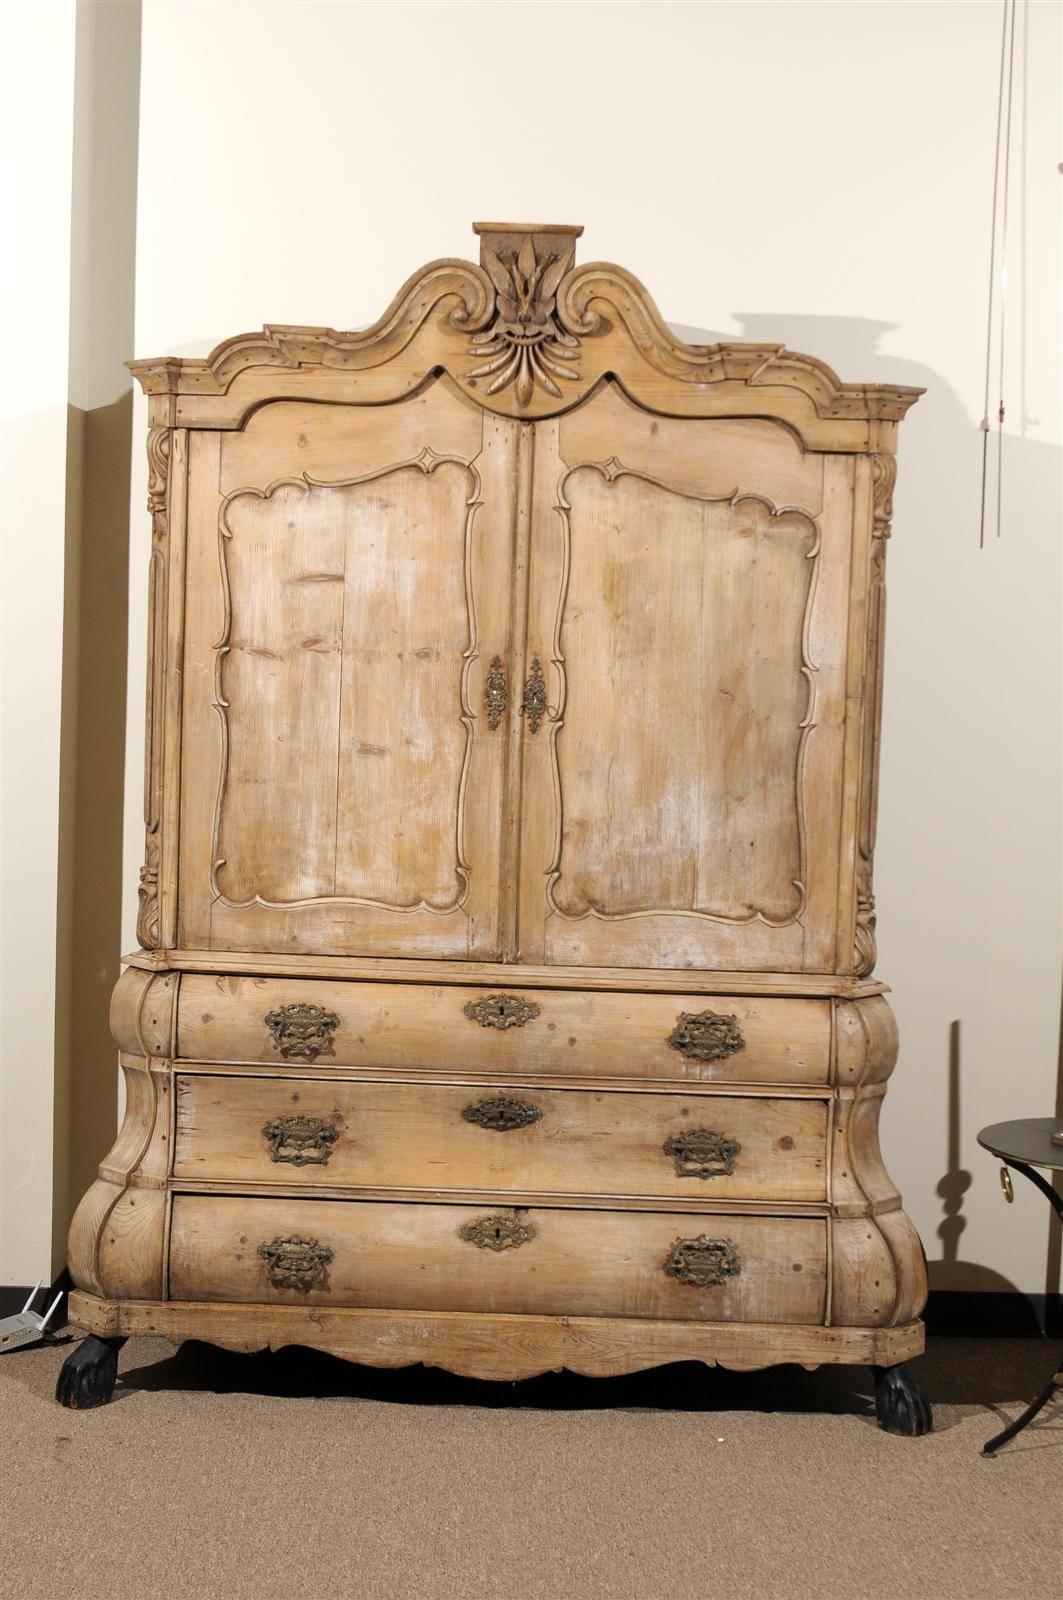 This is a charming pine cabinet with doors above and three large drawers below.  We have had a few of this kind of piece before but this one has a particularly nice appearance.  There is very little finish on the pine but the surface has a luster